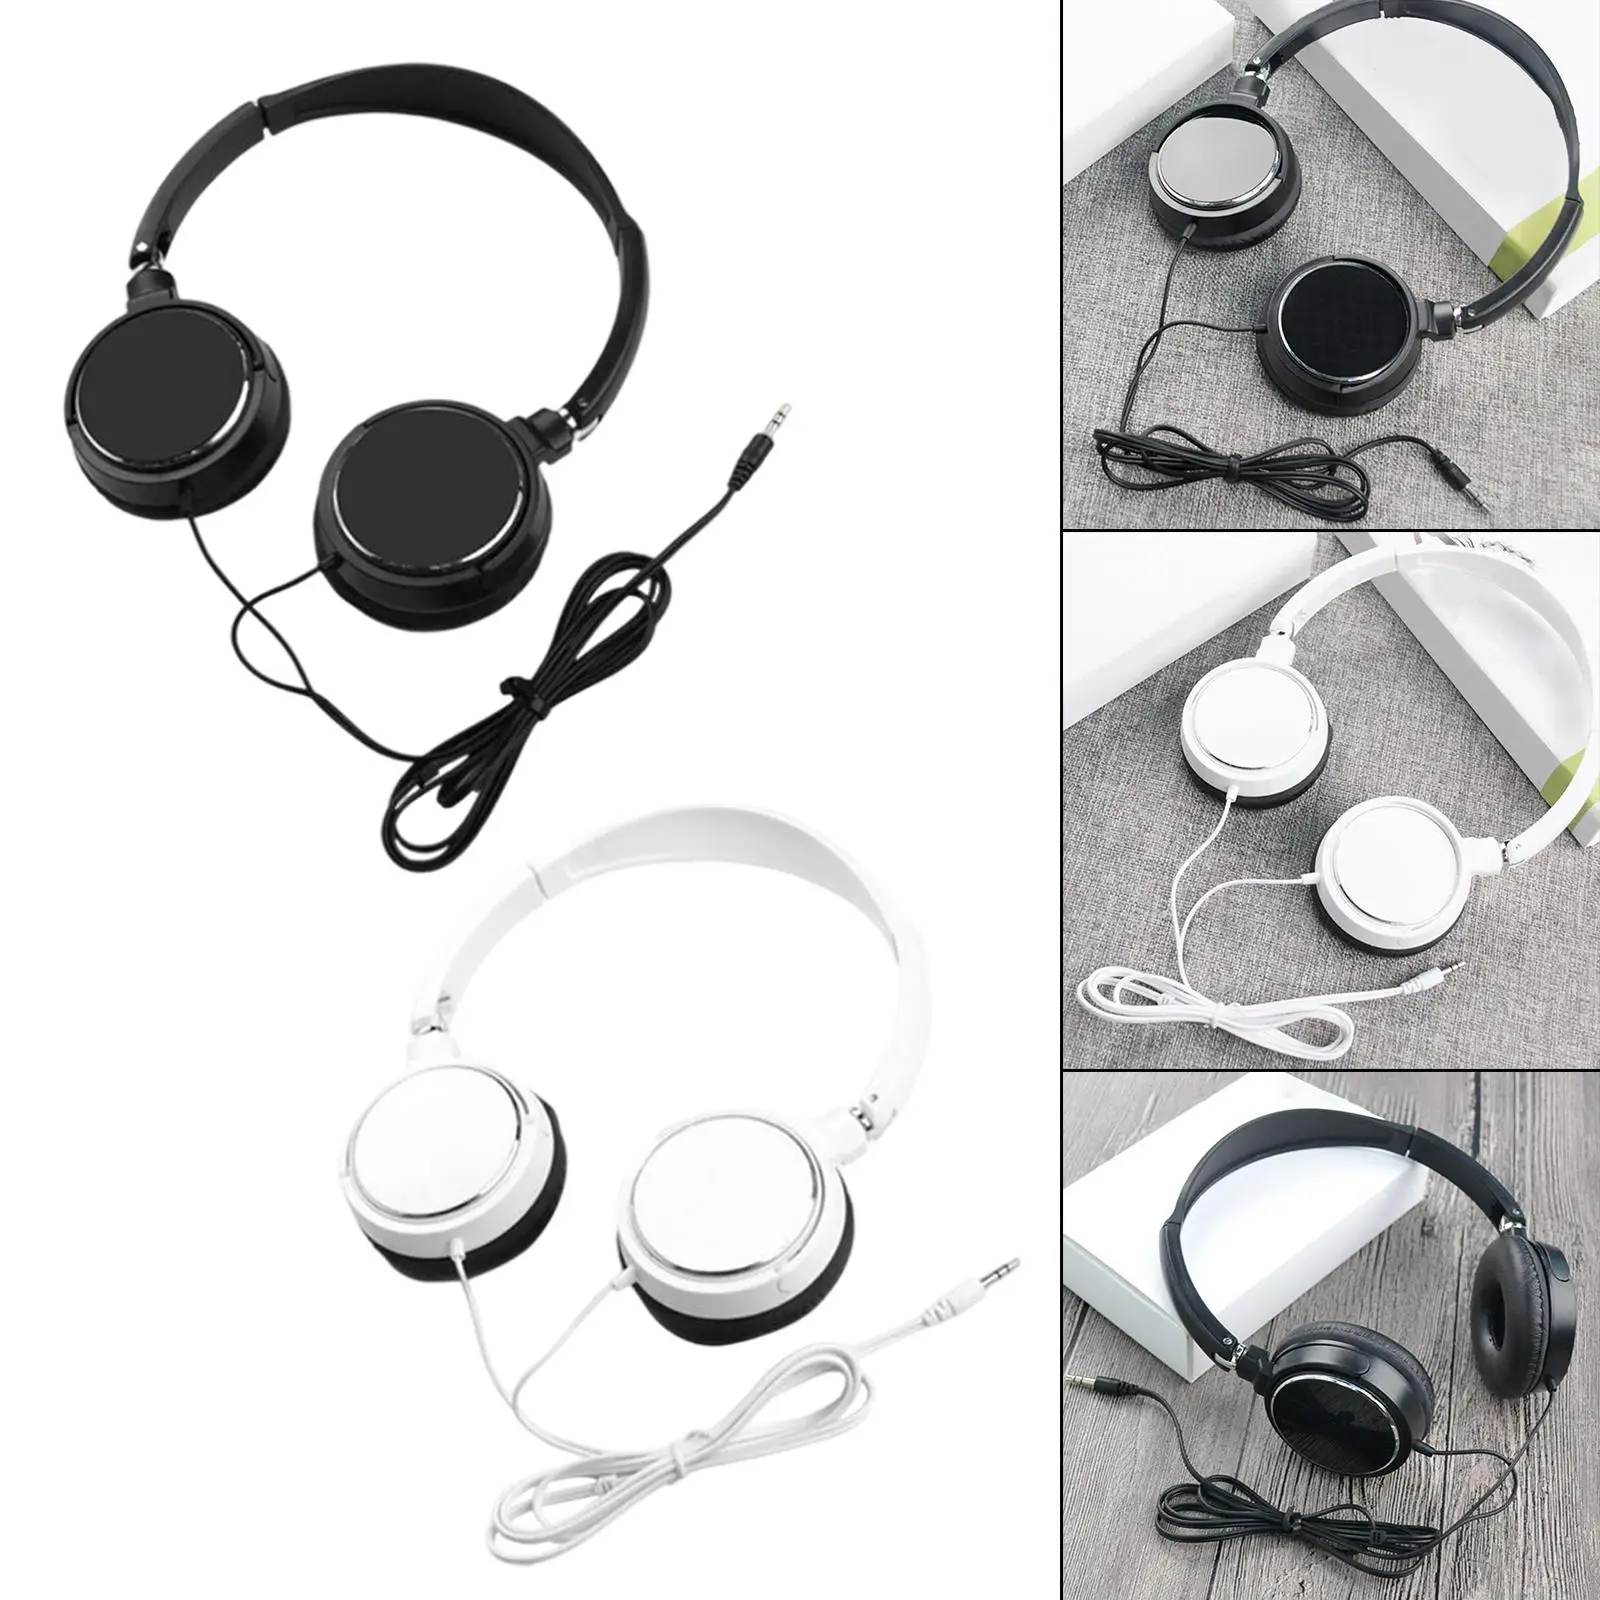 Headphones Volume Control Stereo Corded with Microphone Music Lightweight Over Ear Headset for Cellphones Laptop Course